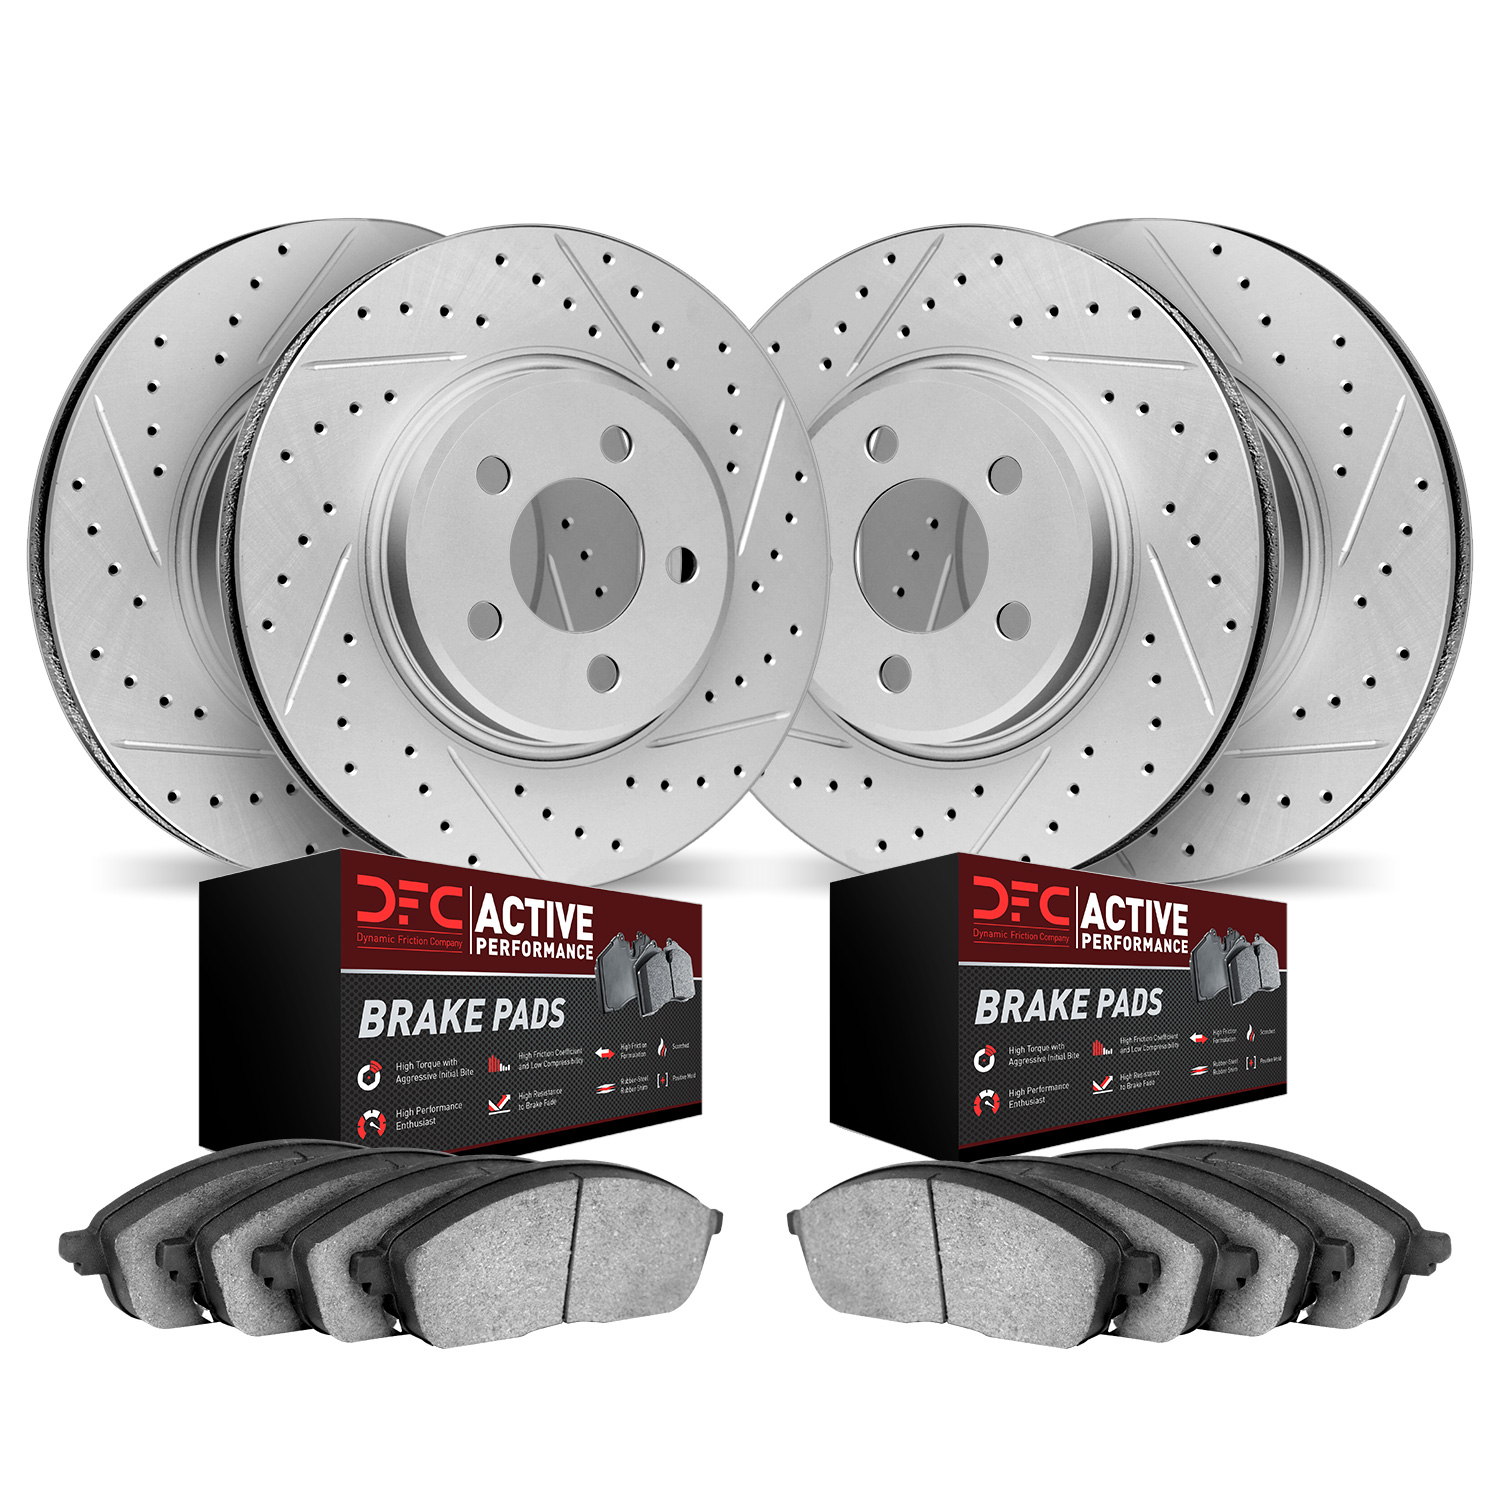 2704-75006 Geoperformance Drilled/Slotted Brake Rotors with Active Performance Pads Kit, 2007-2011 Lexus/Toyota/Scion, Position: